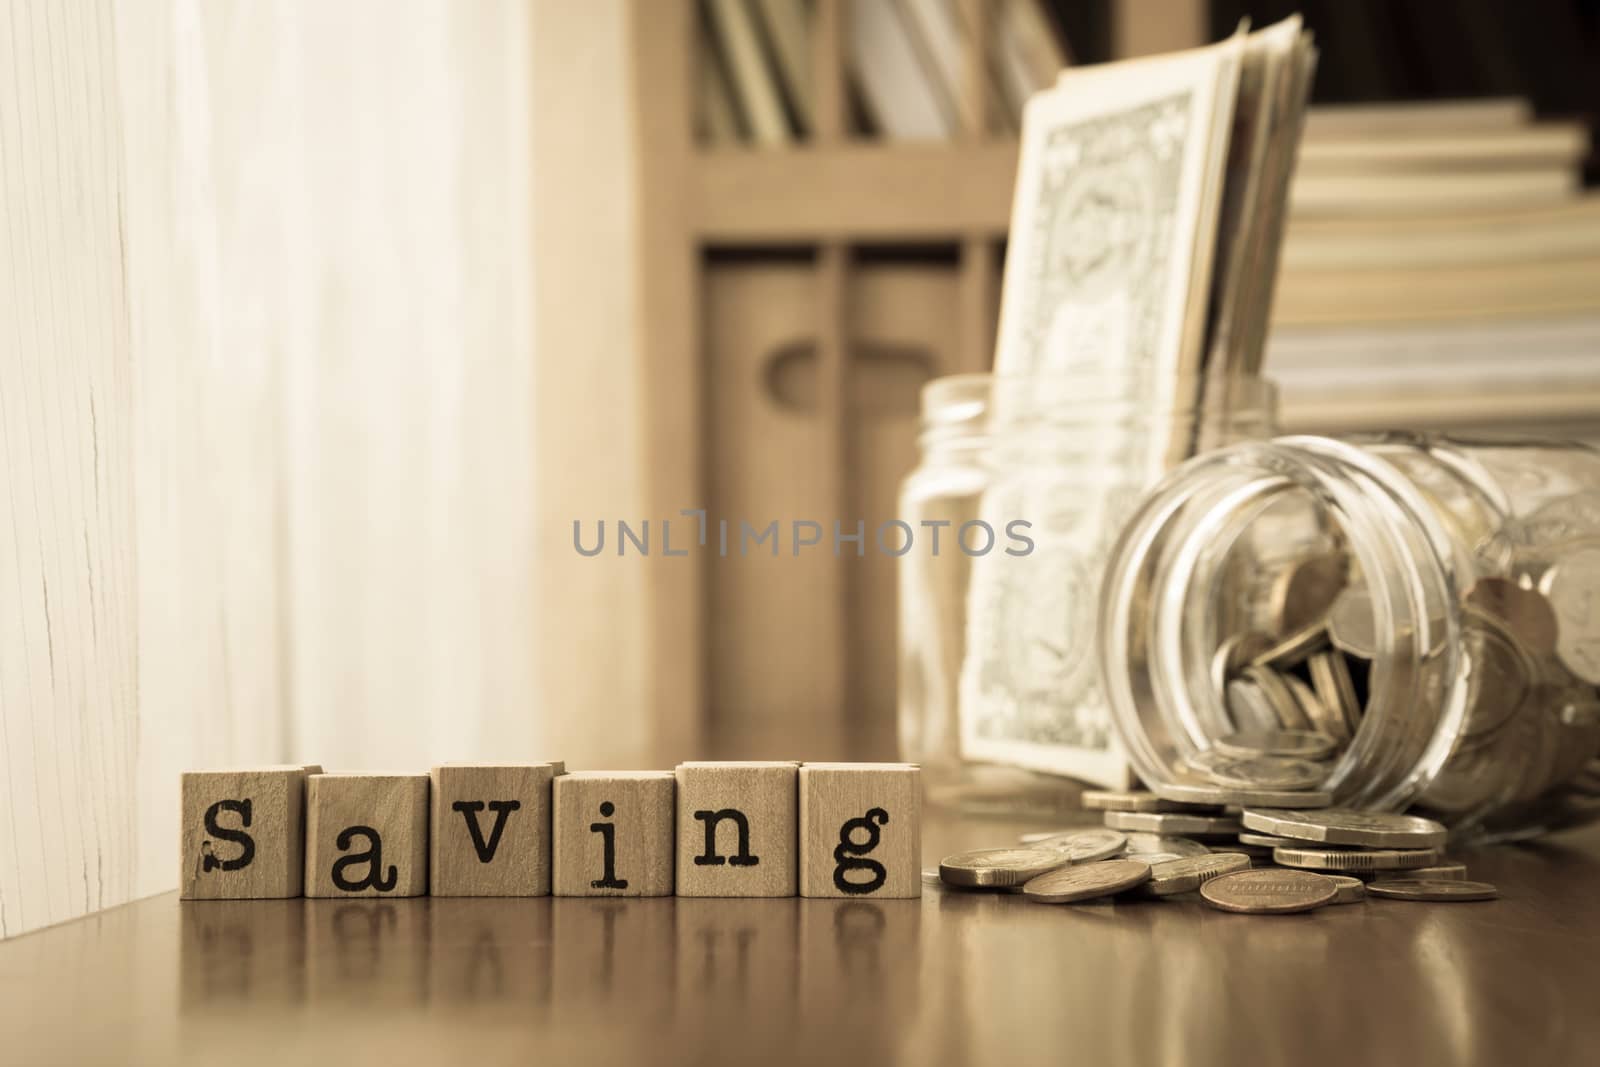 Saving word on rubber stamps place on table with coins and banknotes in money jars, sepia toning